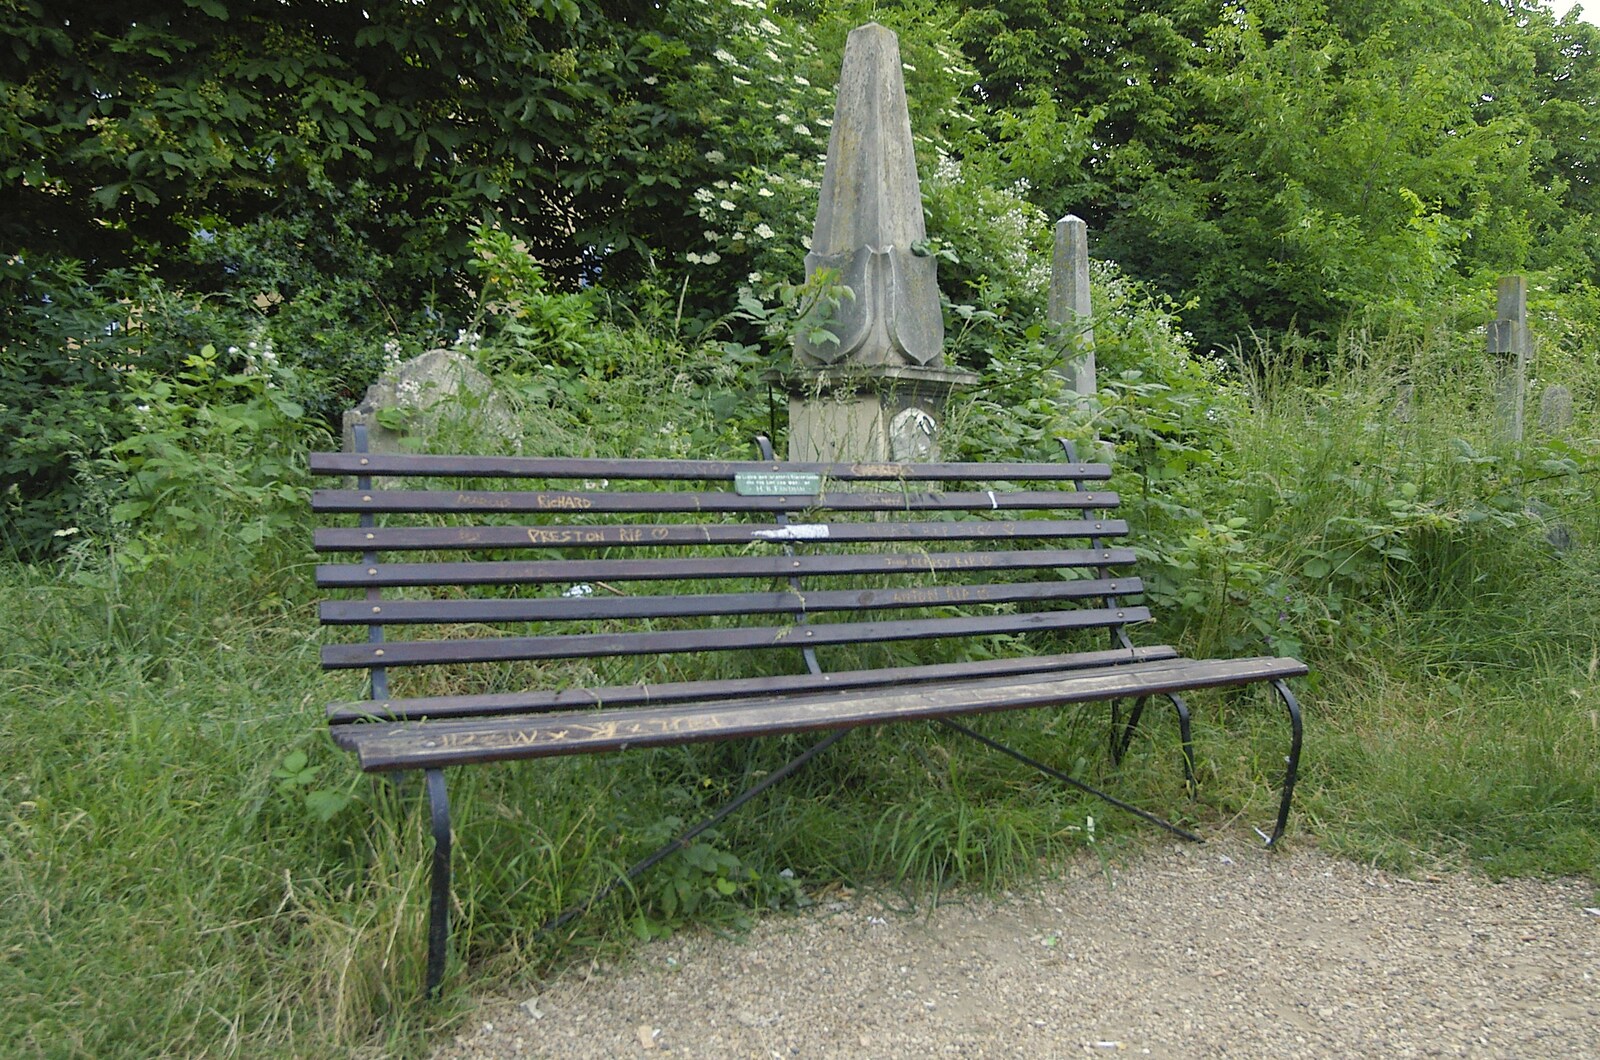 A park bench in Mill Road Cemetery from Ben Leaves "The Lab", Fort St. George, Cambridge - 16th June 2006